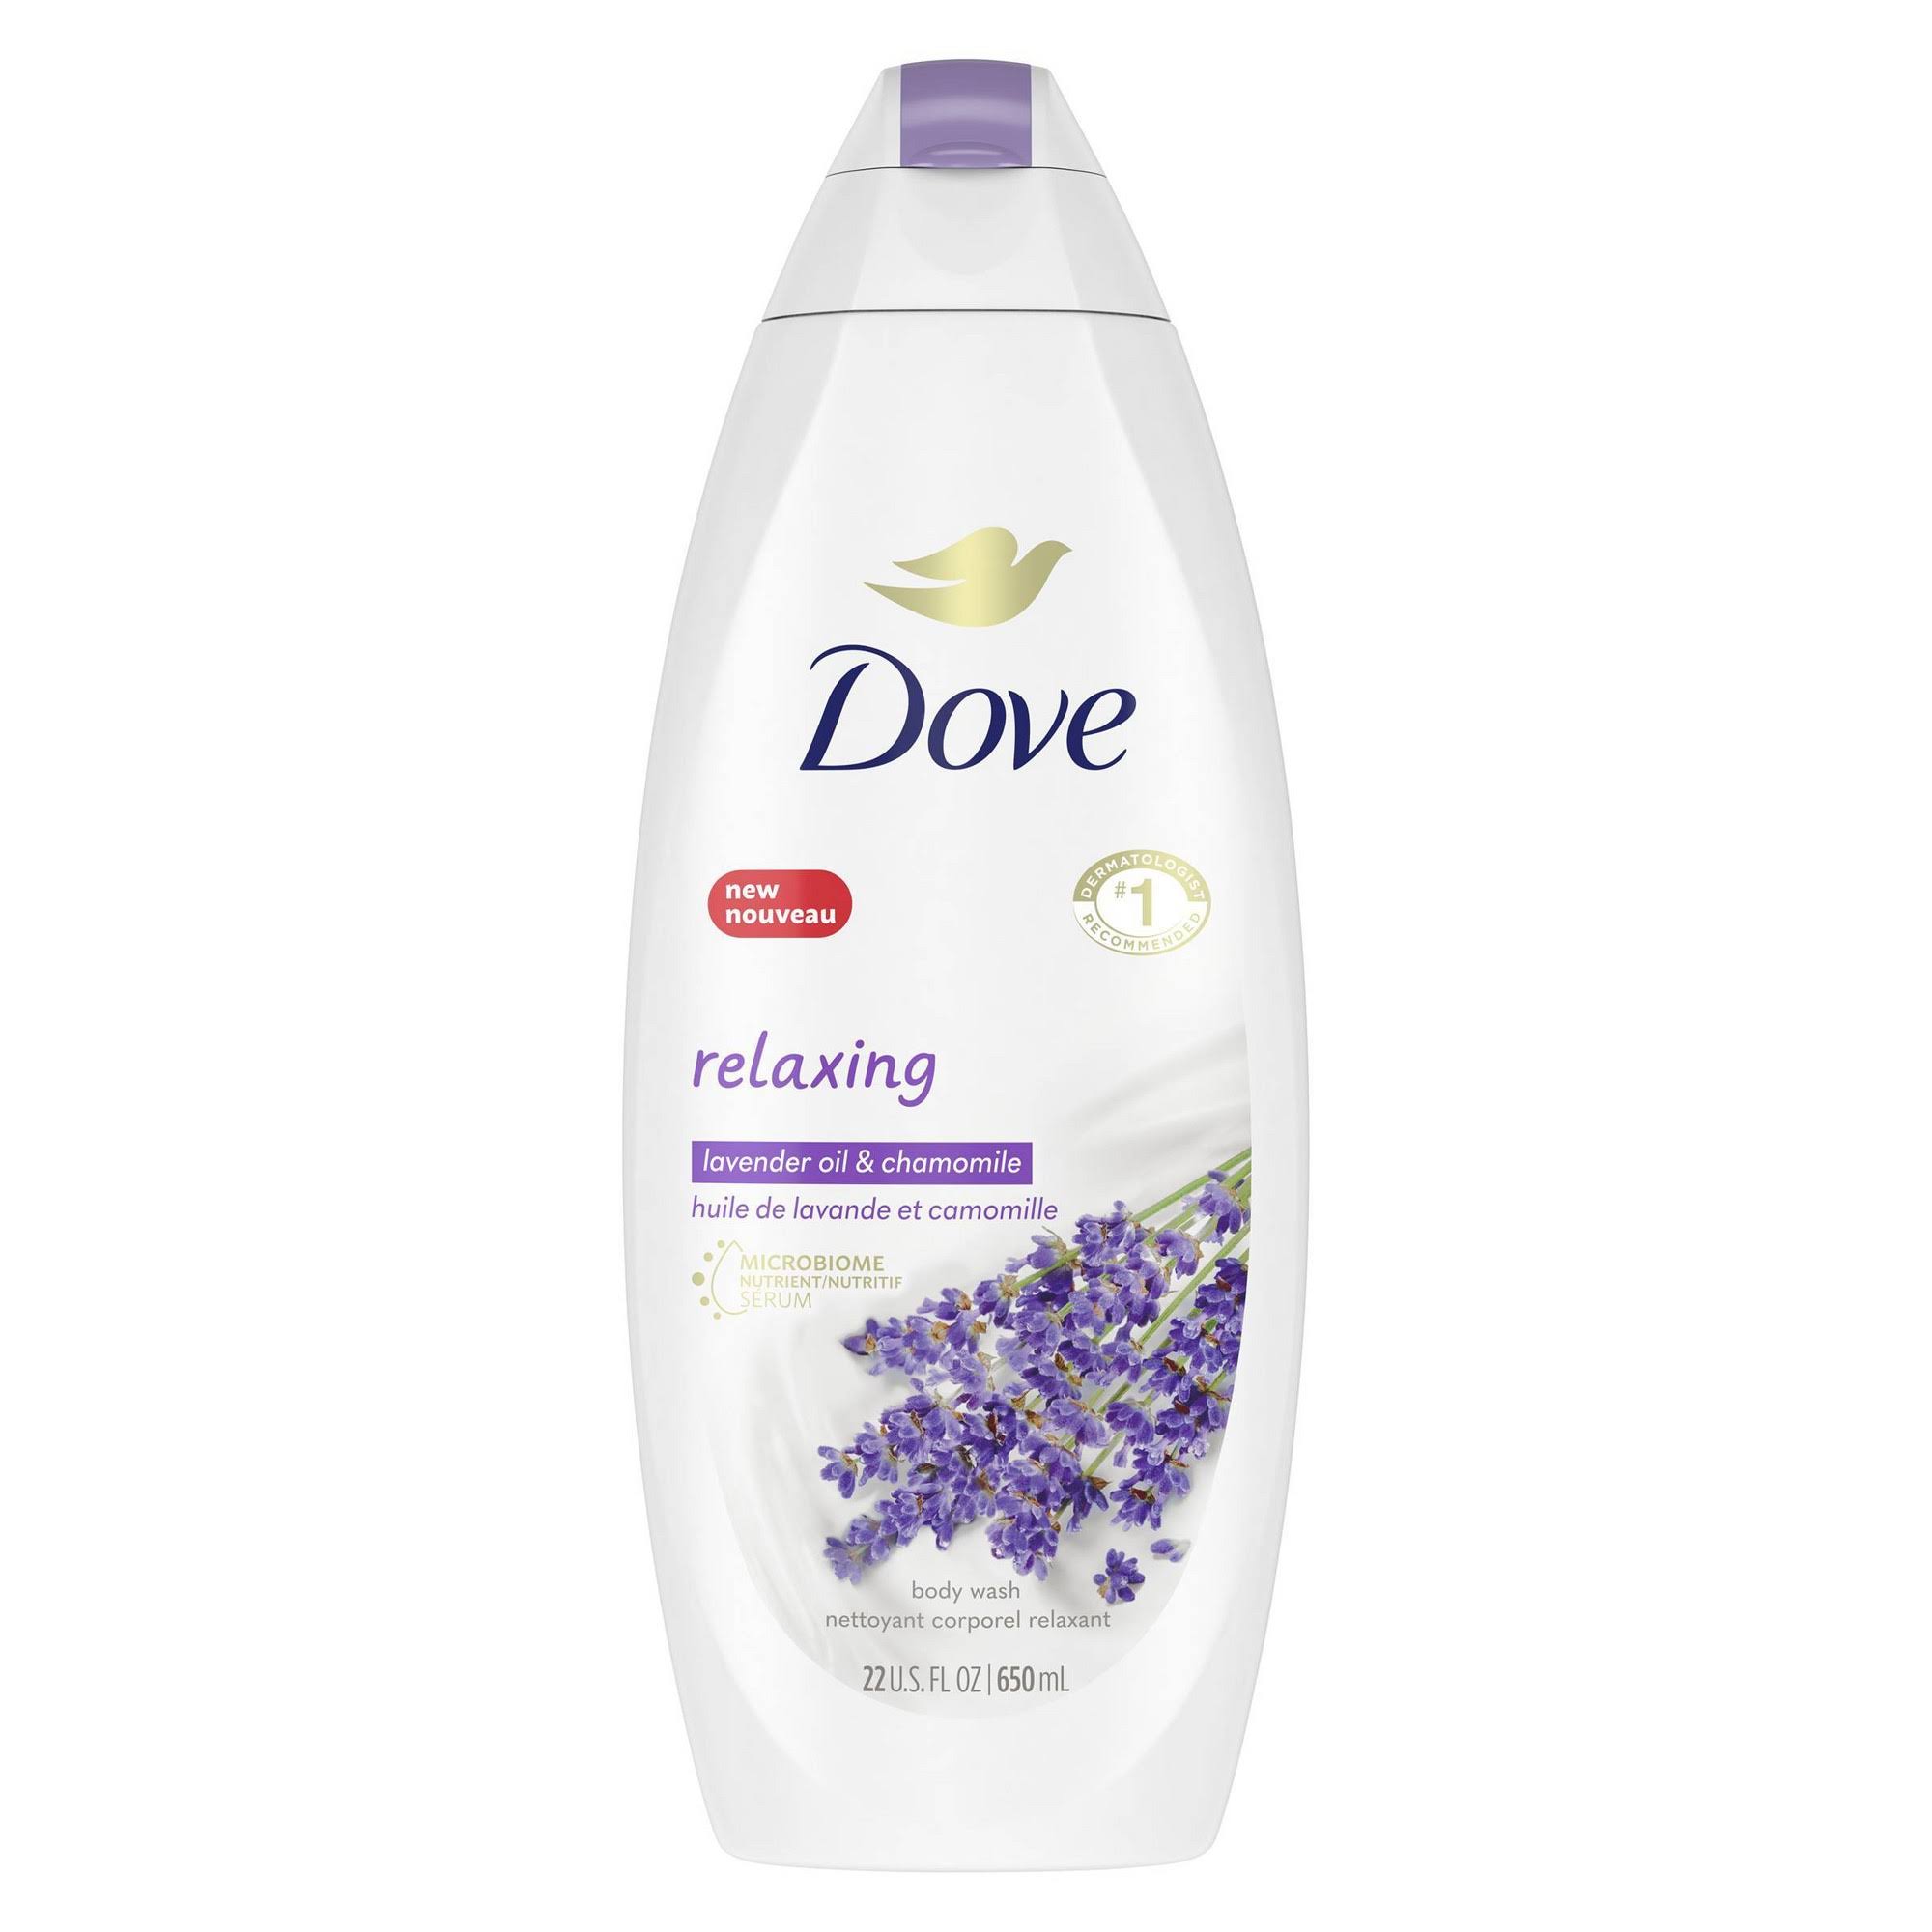 Dove Relaxing Body Wash - Relaxing Lavender, 22oz